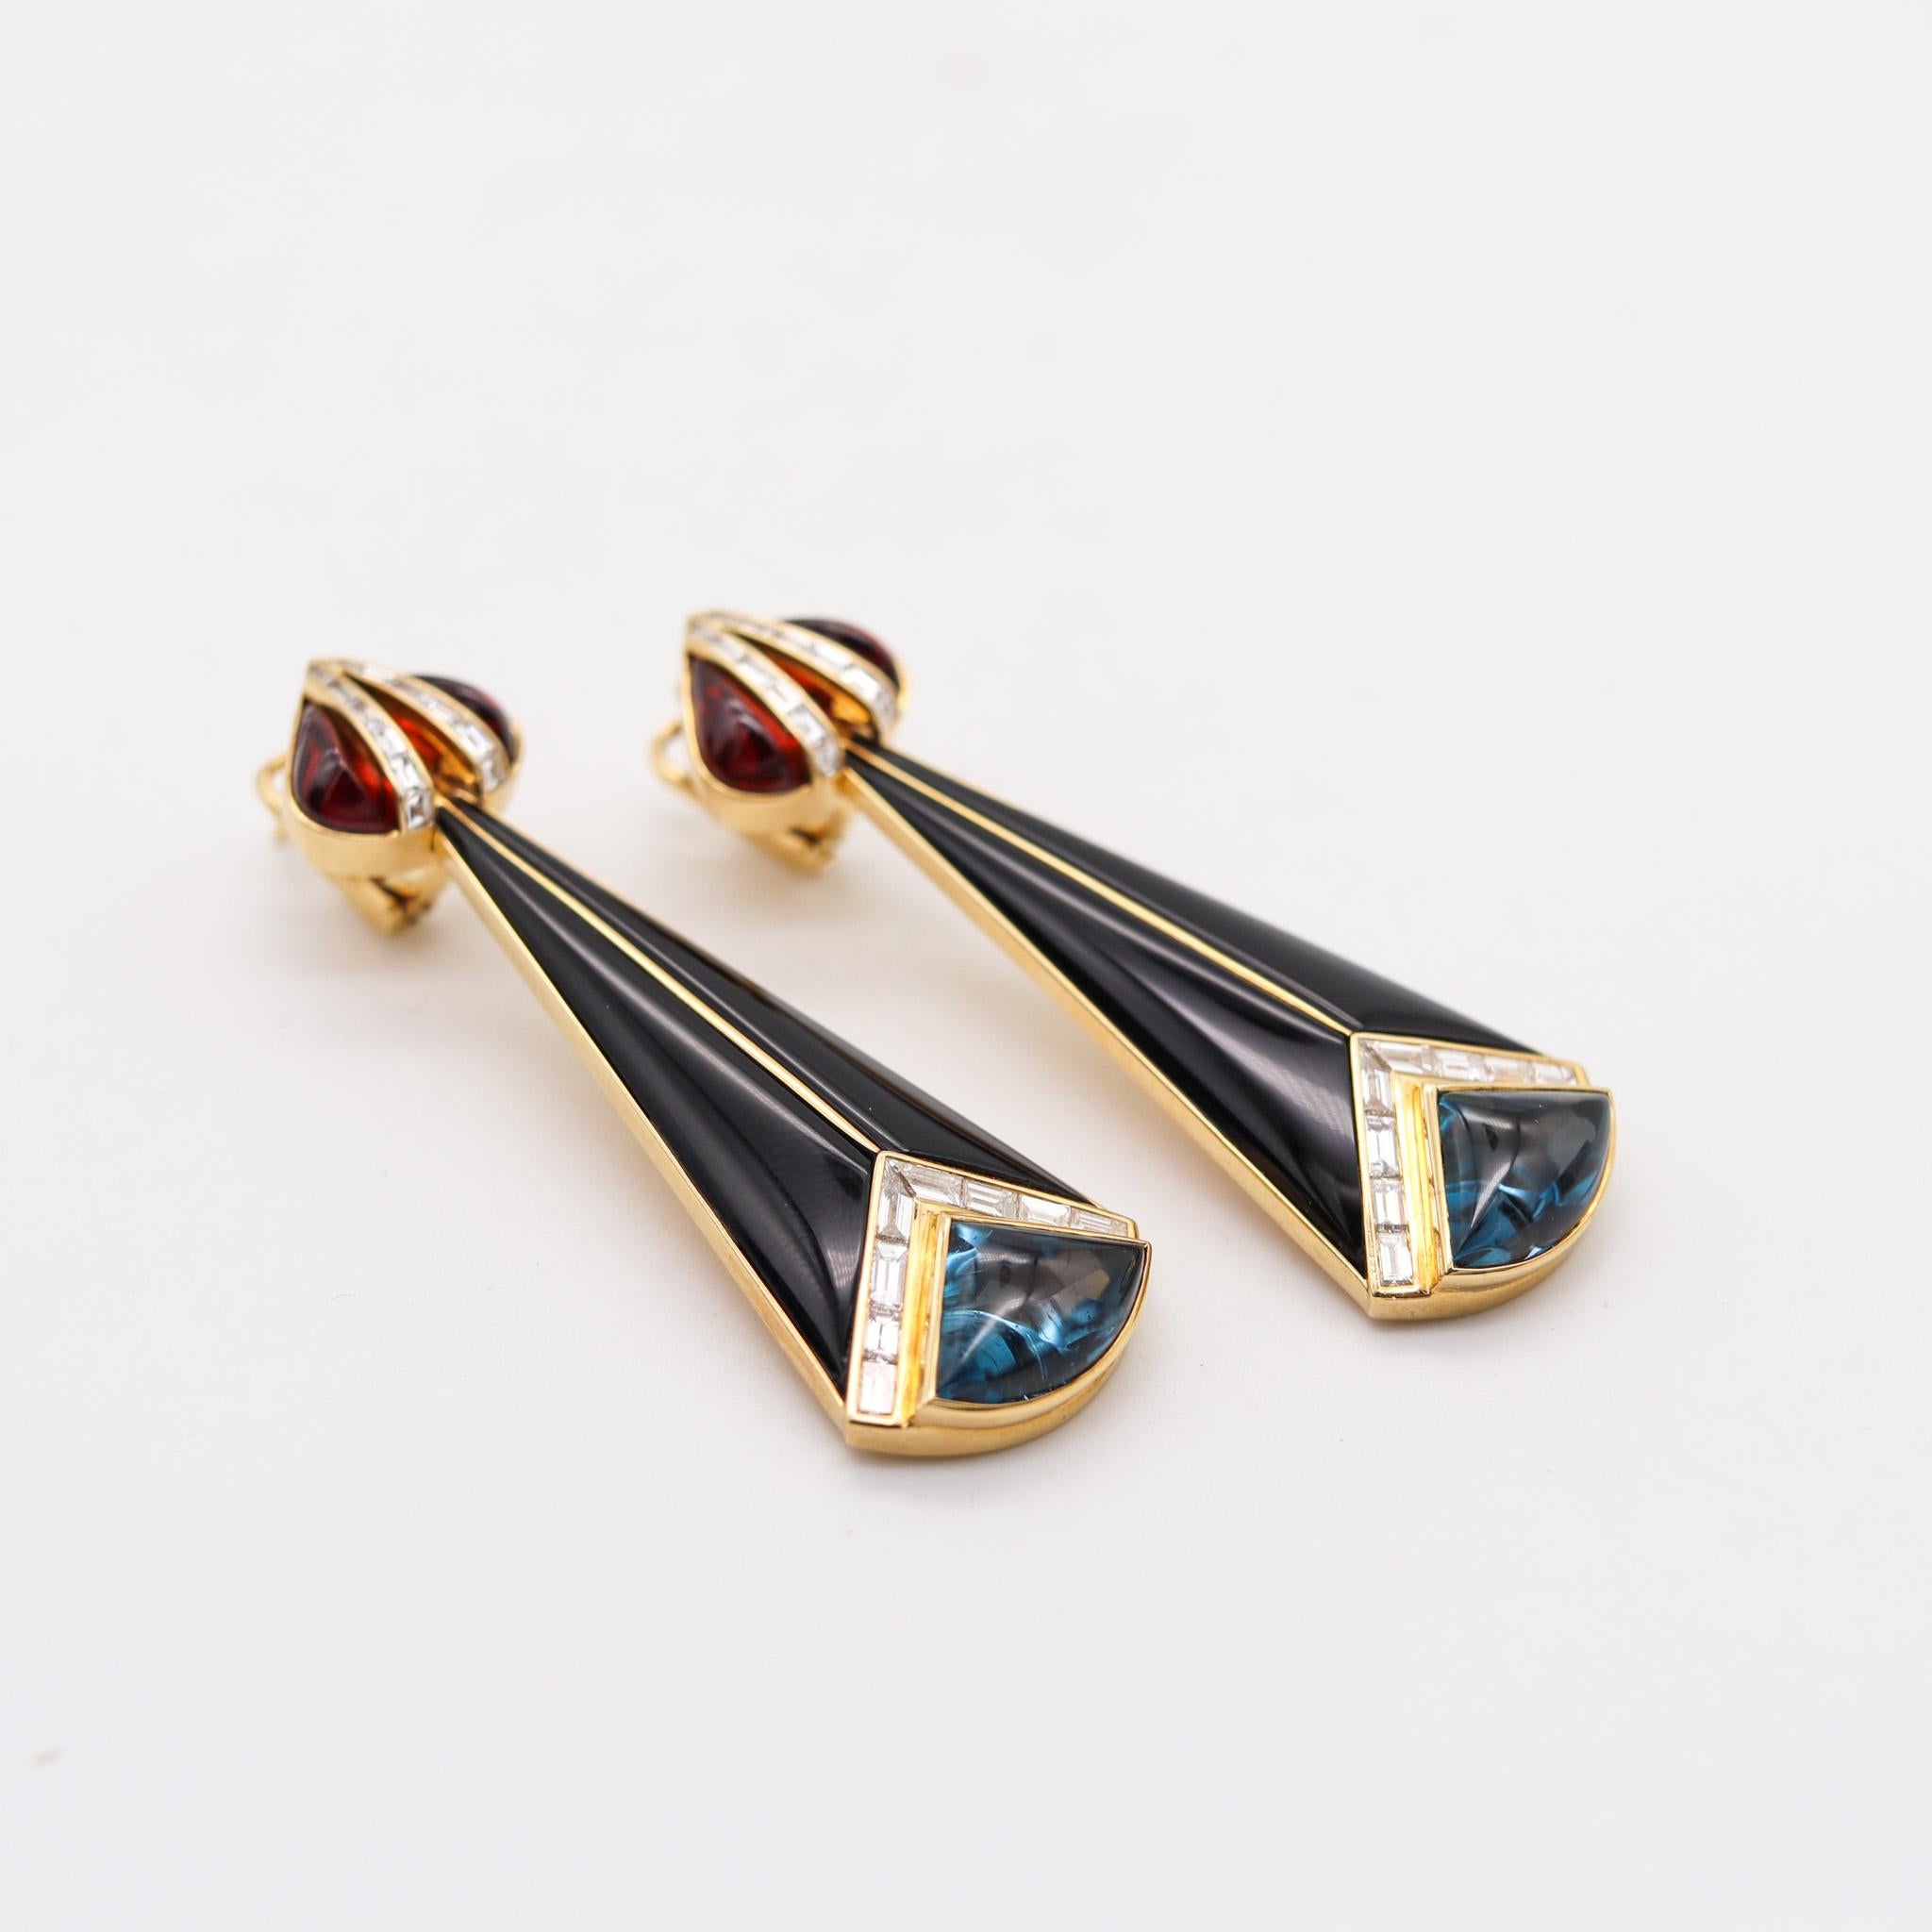 Troc dangle earrings designed by Marina B.

These beautiful vintage earrings are extremely rare, since has been produced in a very limited edition of only 5 pairs. Were made in Milano Italy by the iconic Marina Bvlgari, back in the 1983. This pair